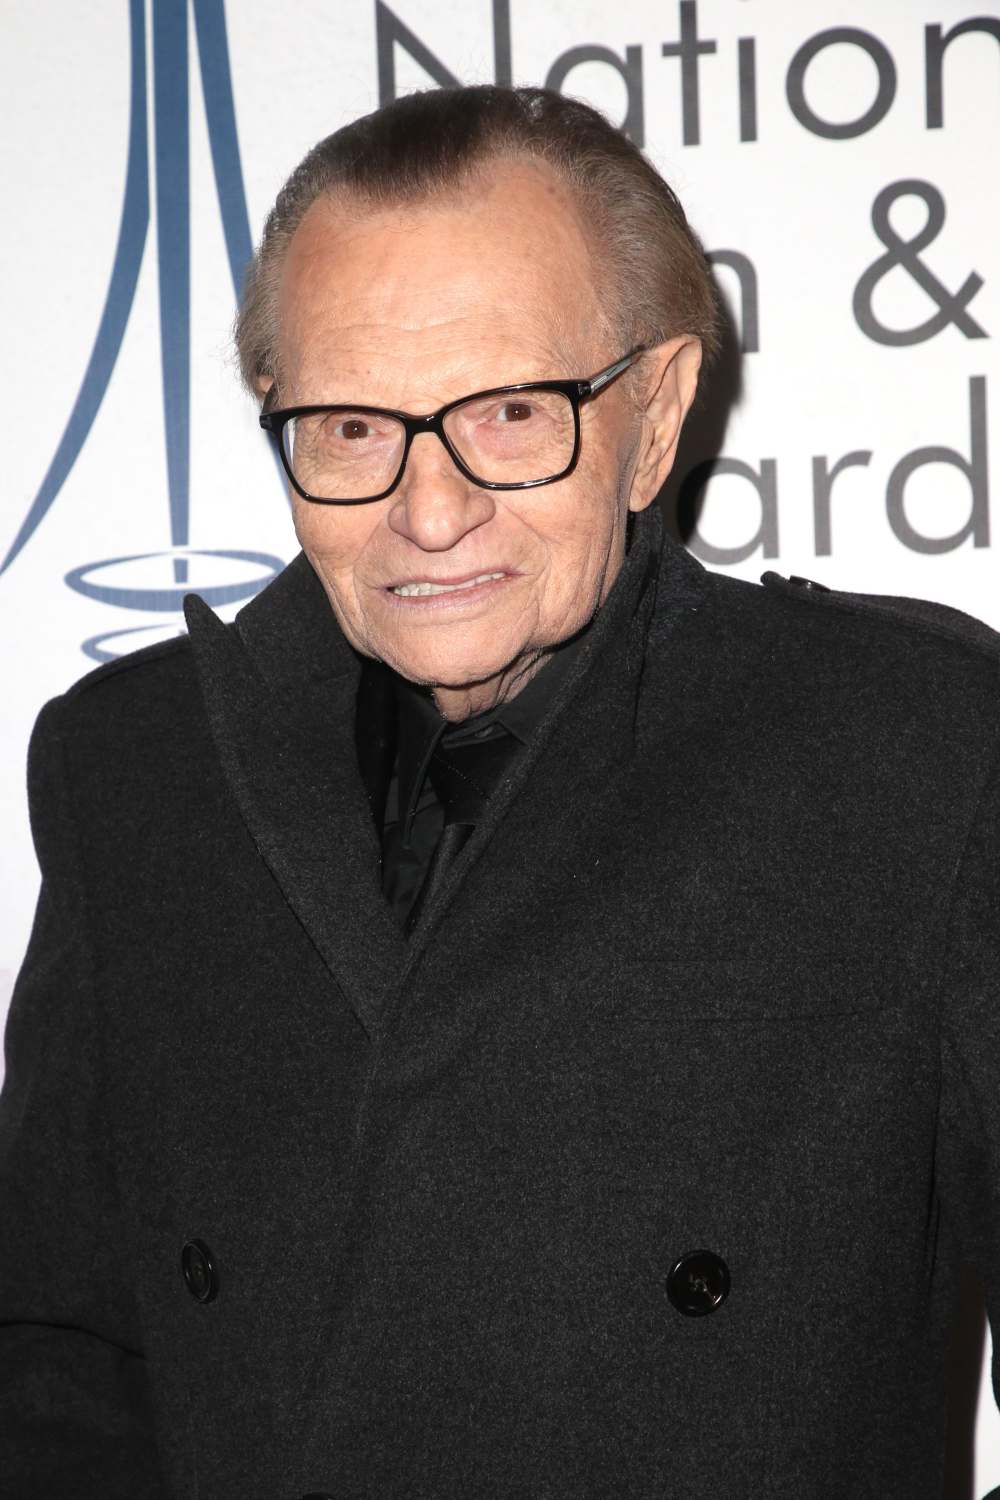 Larry King Speaks Out After the Deaths of His Son Andy and Daughter Chaia 3 Weeks Apart